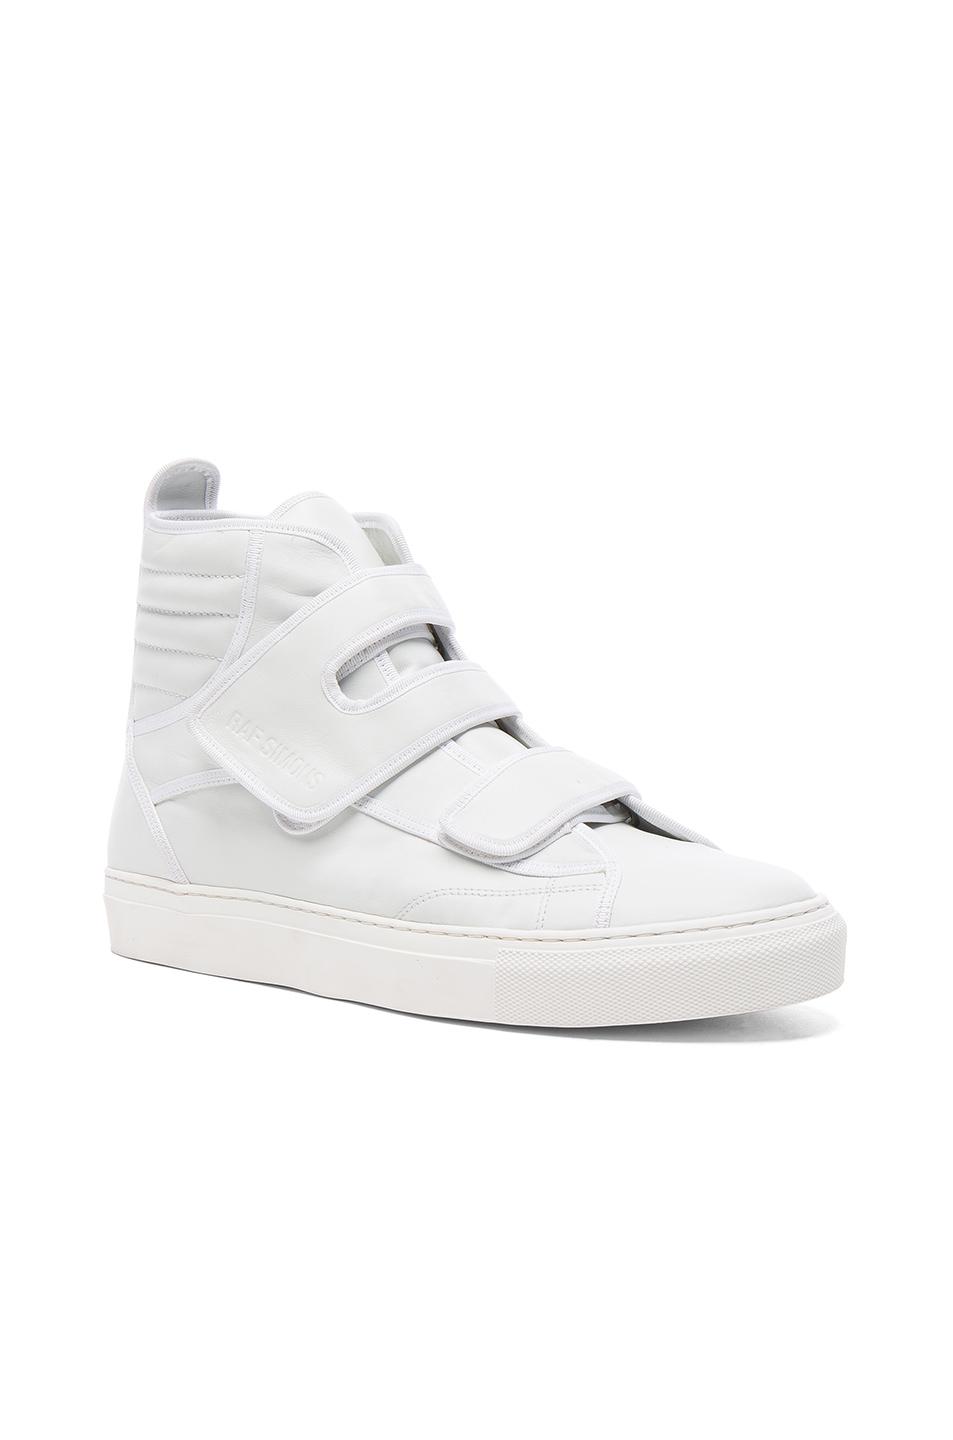 Raf simons High Top Velcro Sneakers in White | Lyst